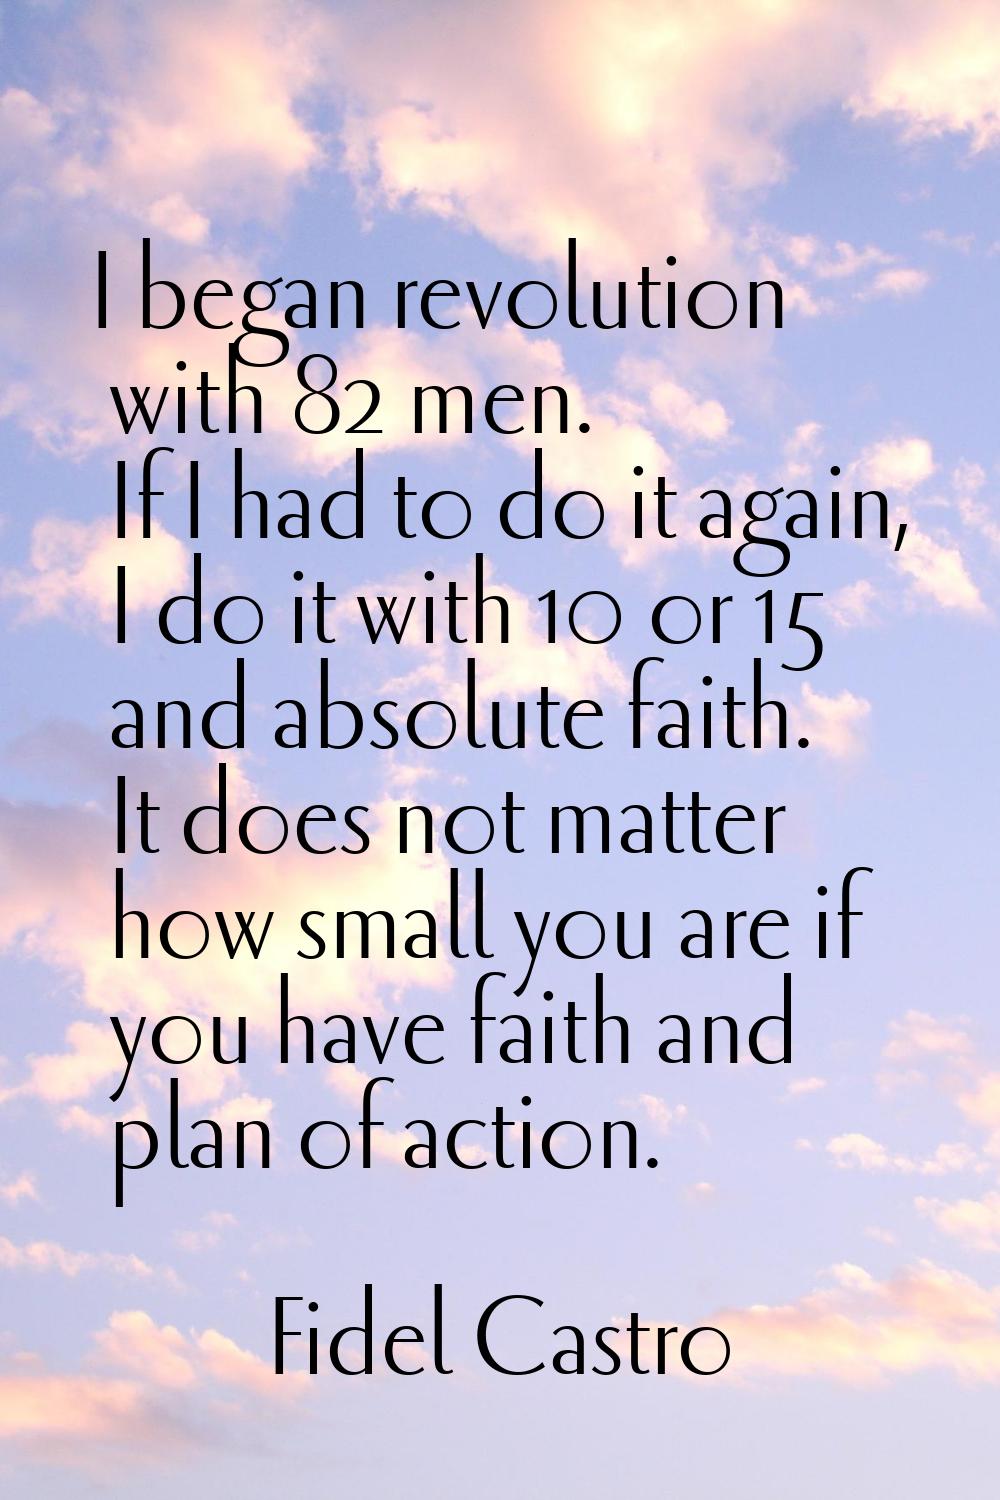 I began revolution with 82 men. If I had to do it again, I do it with 10 or 15 and absolute faith. 